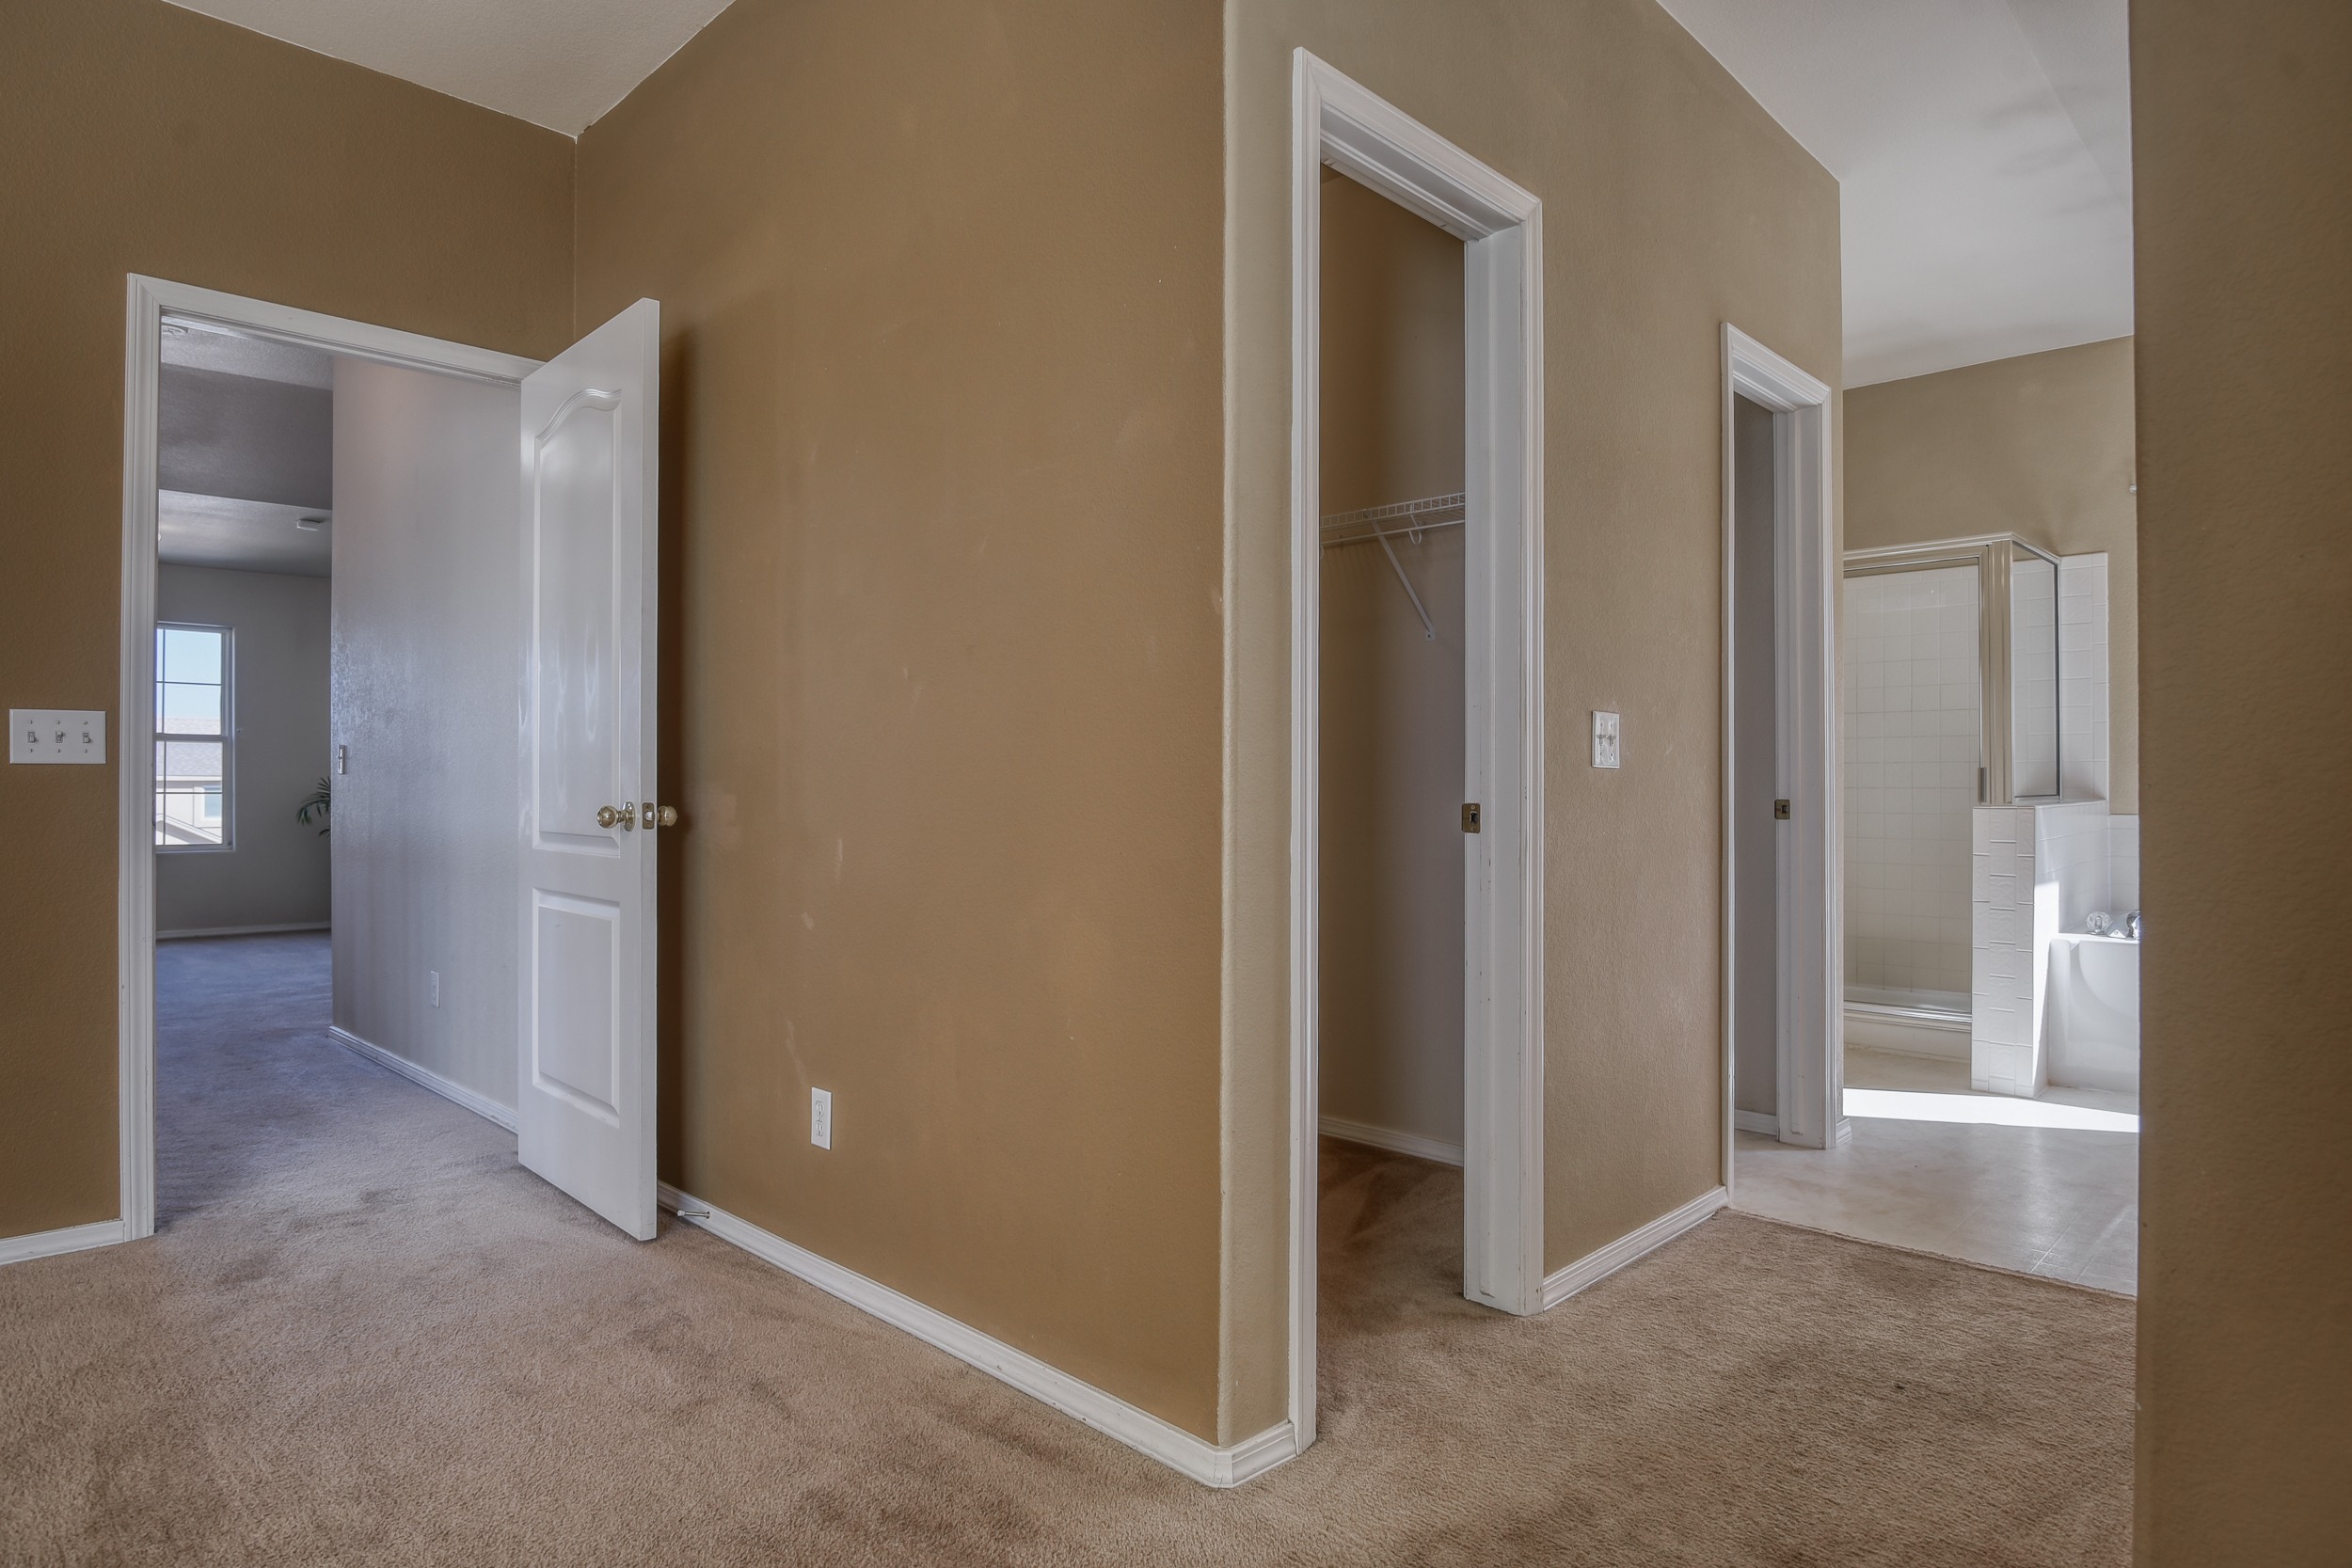 Walk-in closet to the left and traditional closet to the right.